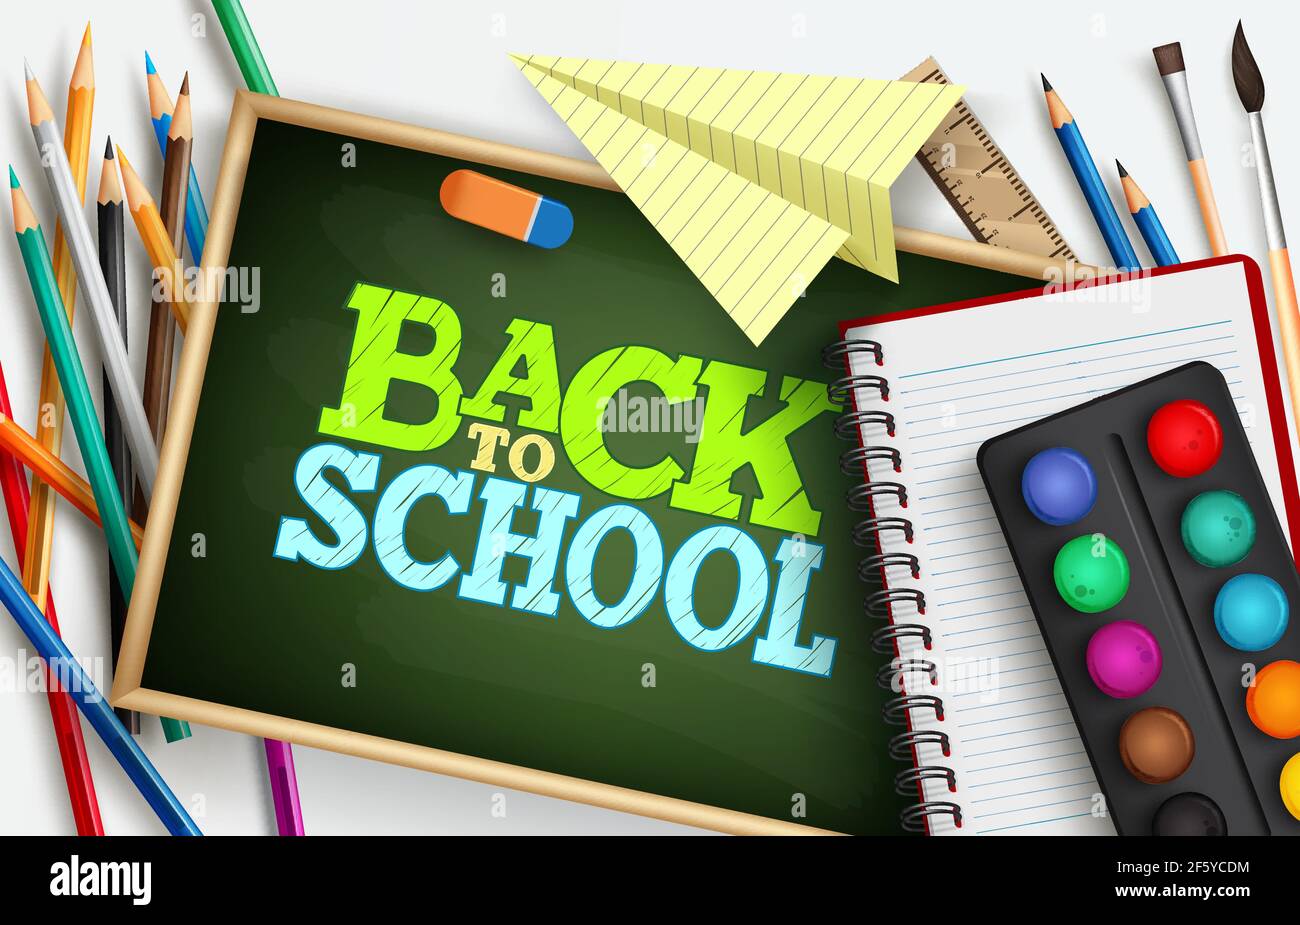 Back to school vector concept design. Back to school text in chalkboard background with elements like notebook, paint and paper fold for student. Stock Vector